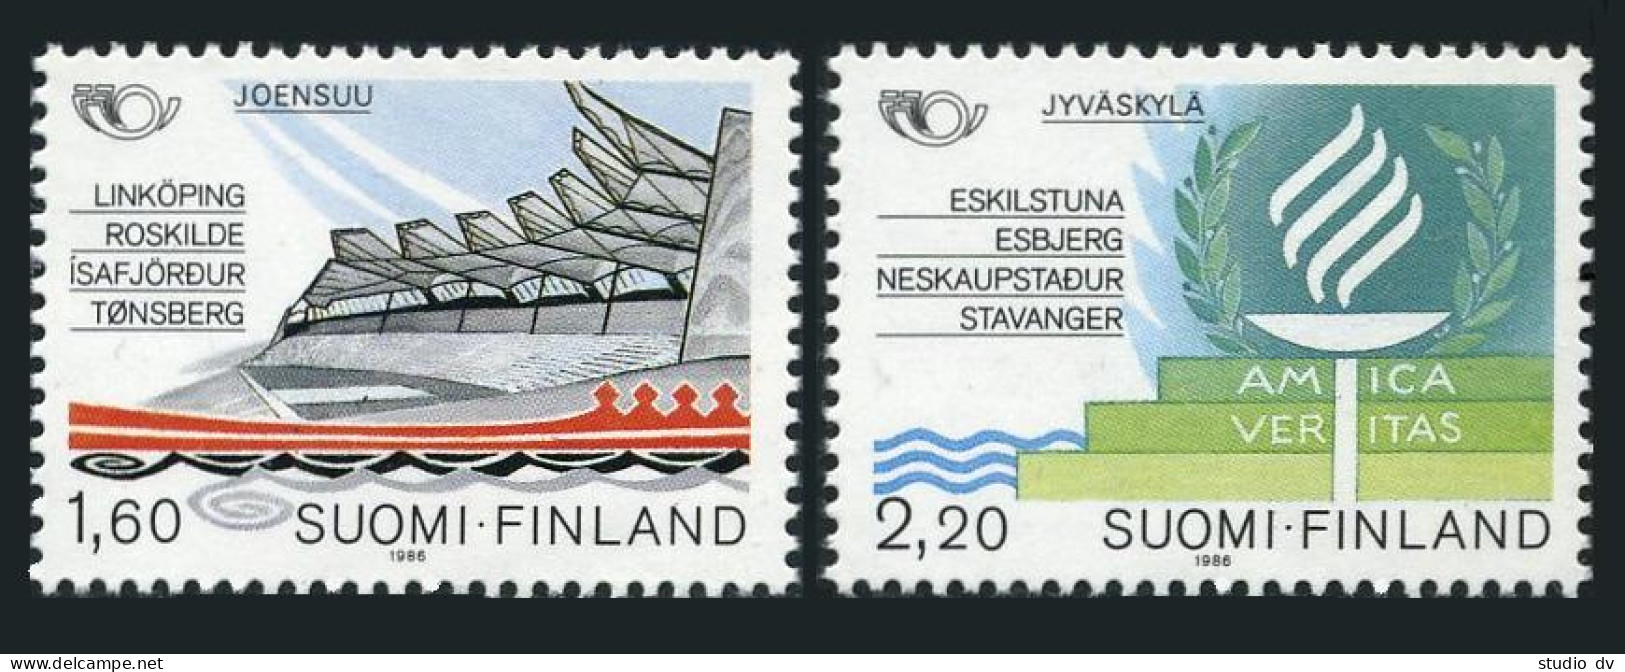 Finland 738-739, MNH. Michel 996-997. Nordic Cooperation 1986. Sister Towns. - Unused Stamps